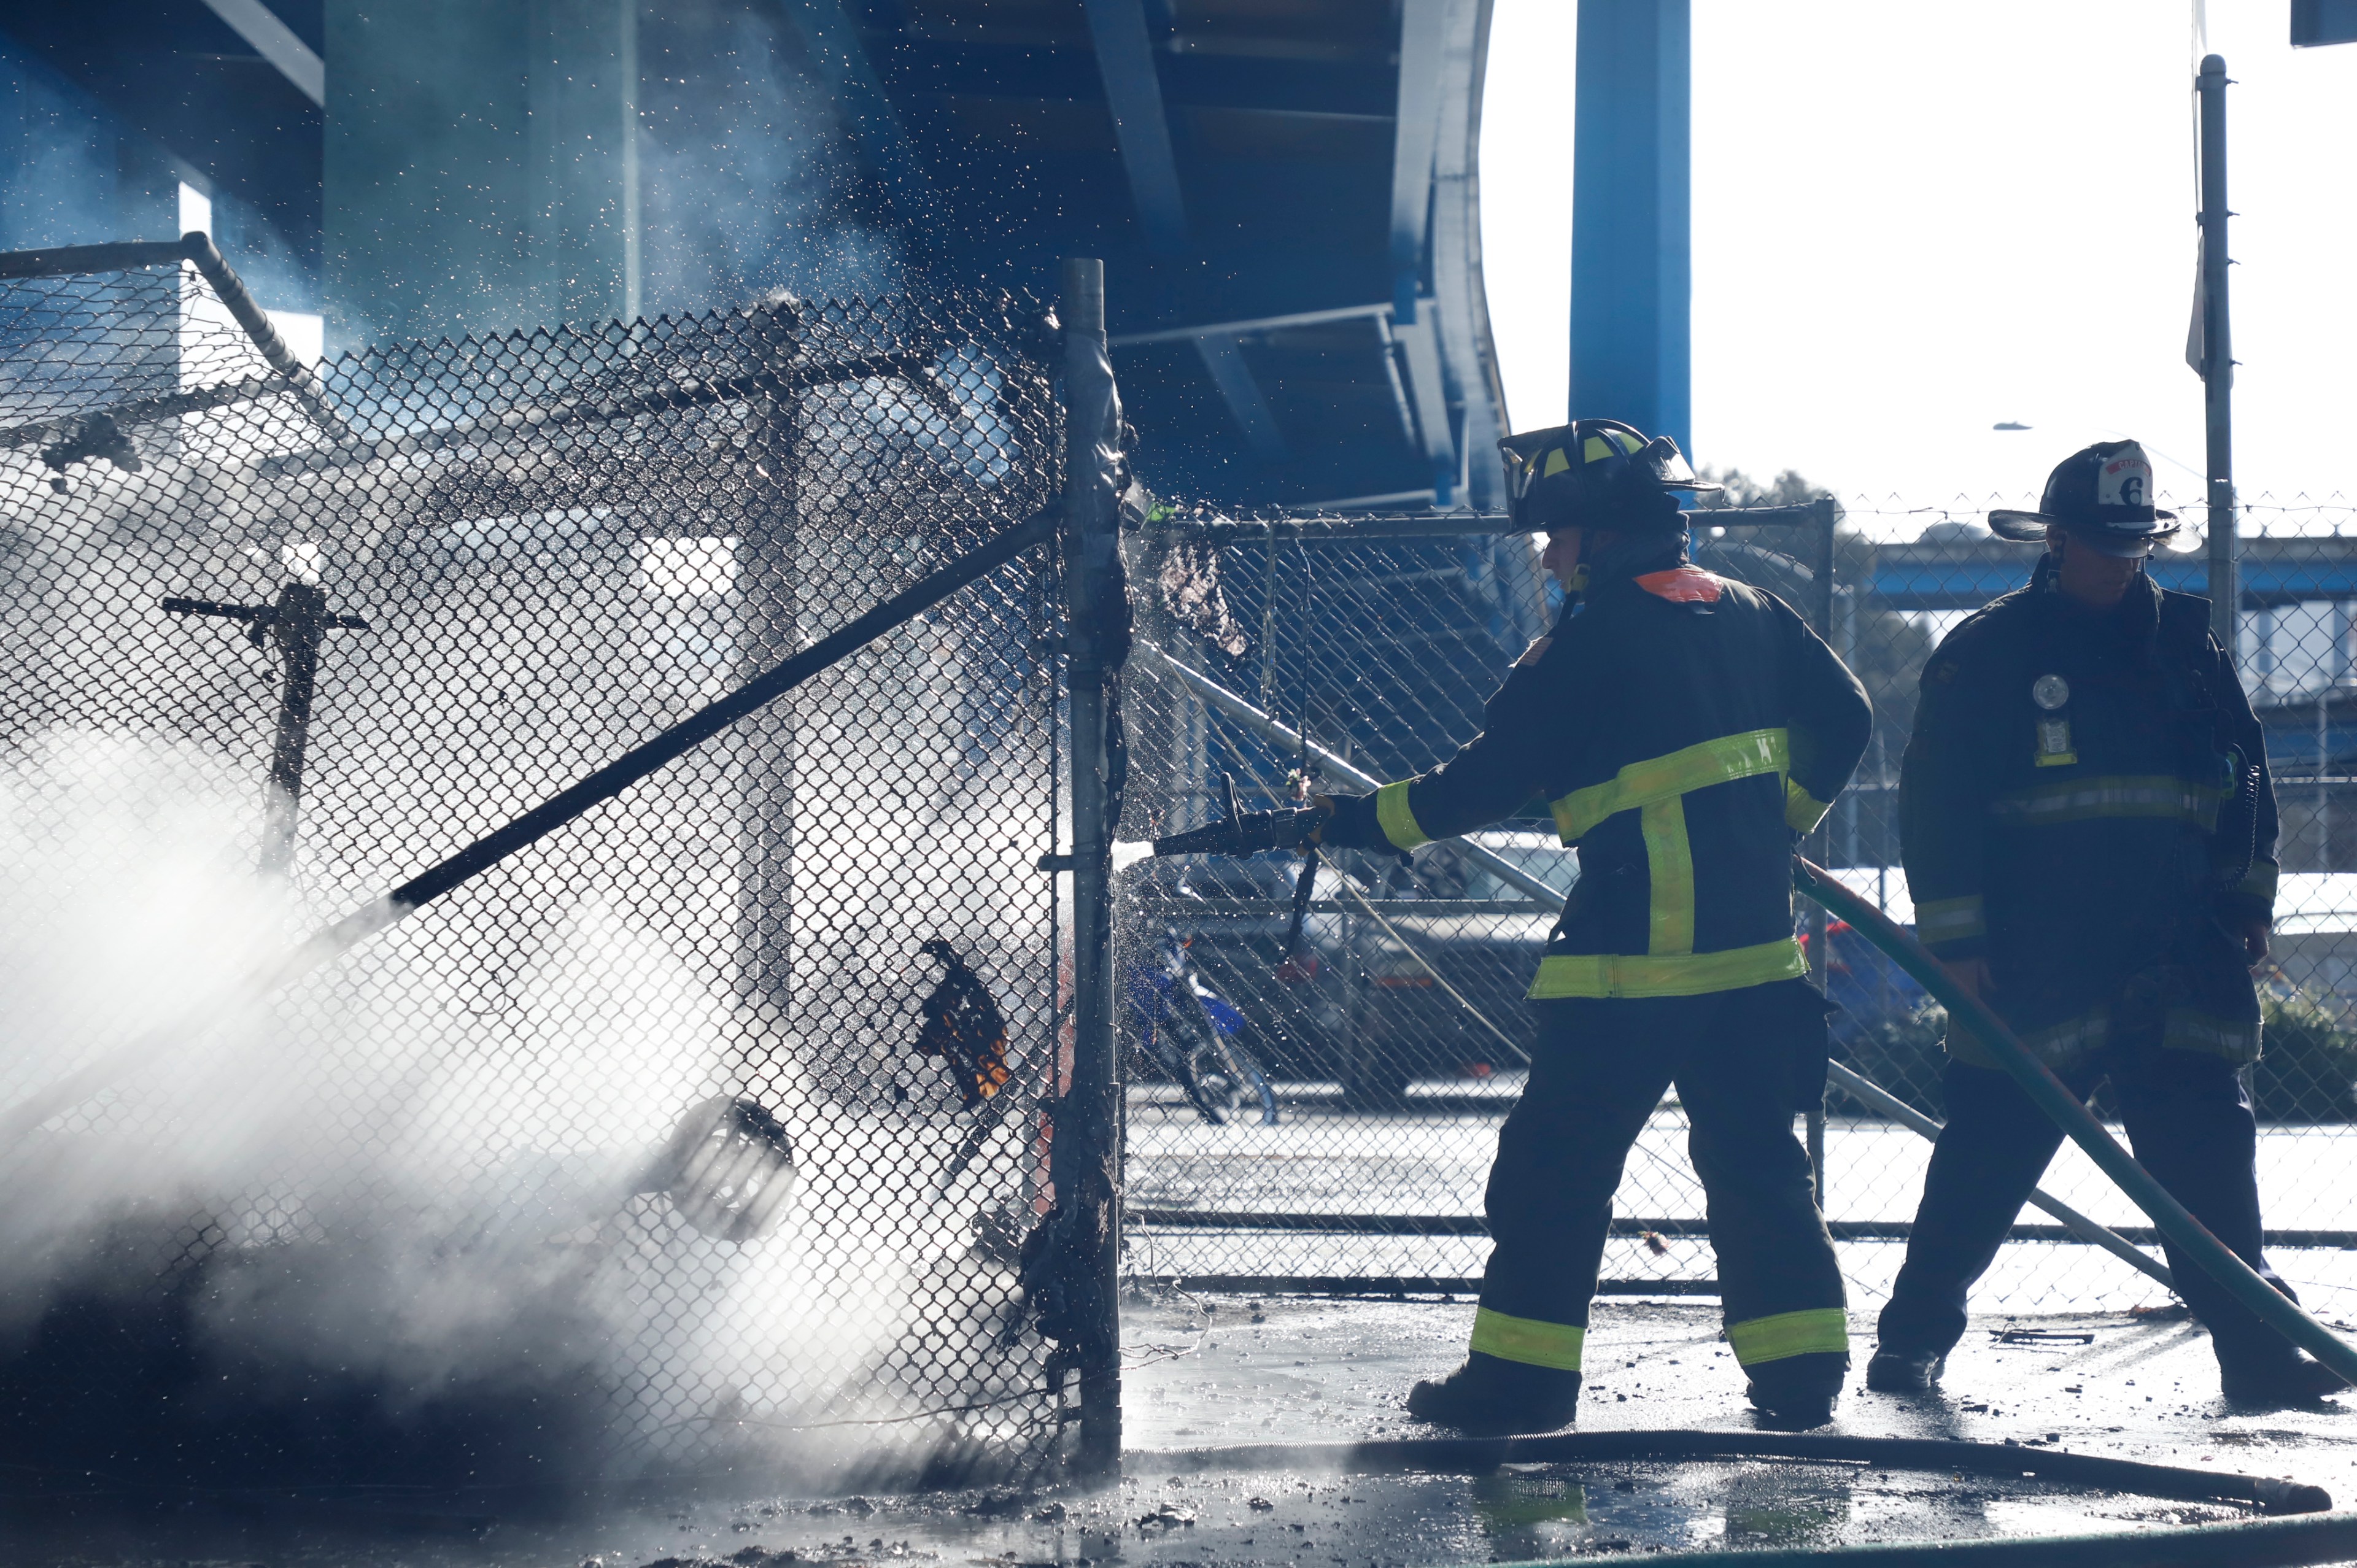 Two firefighters extinguish a fire behind a chain-link fence, water spraying through the air, under sunlight.